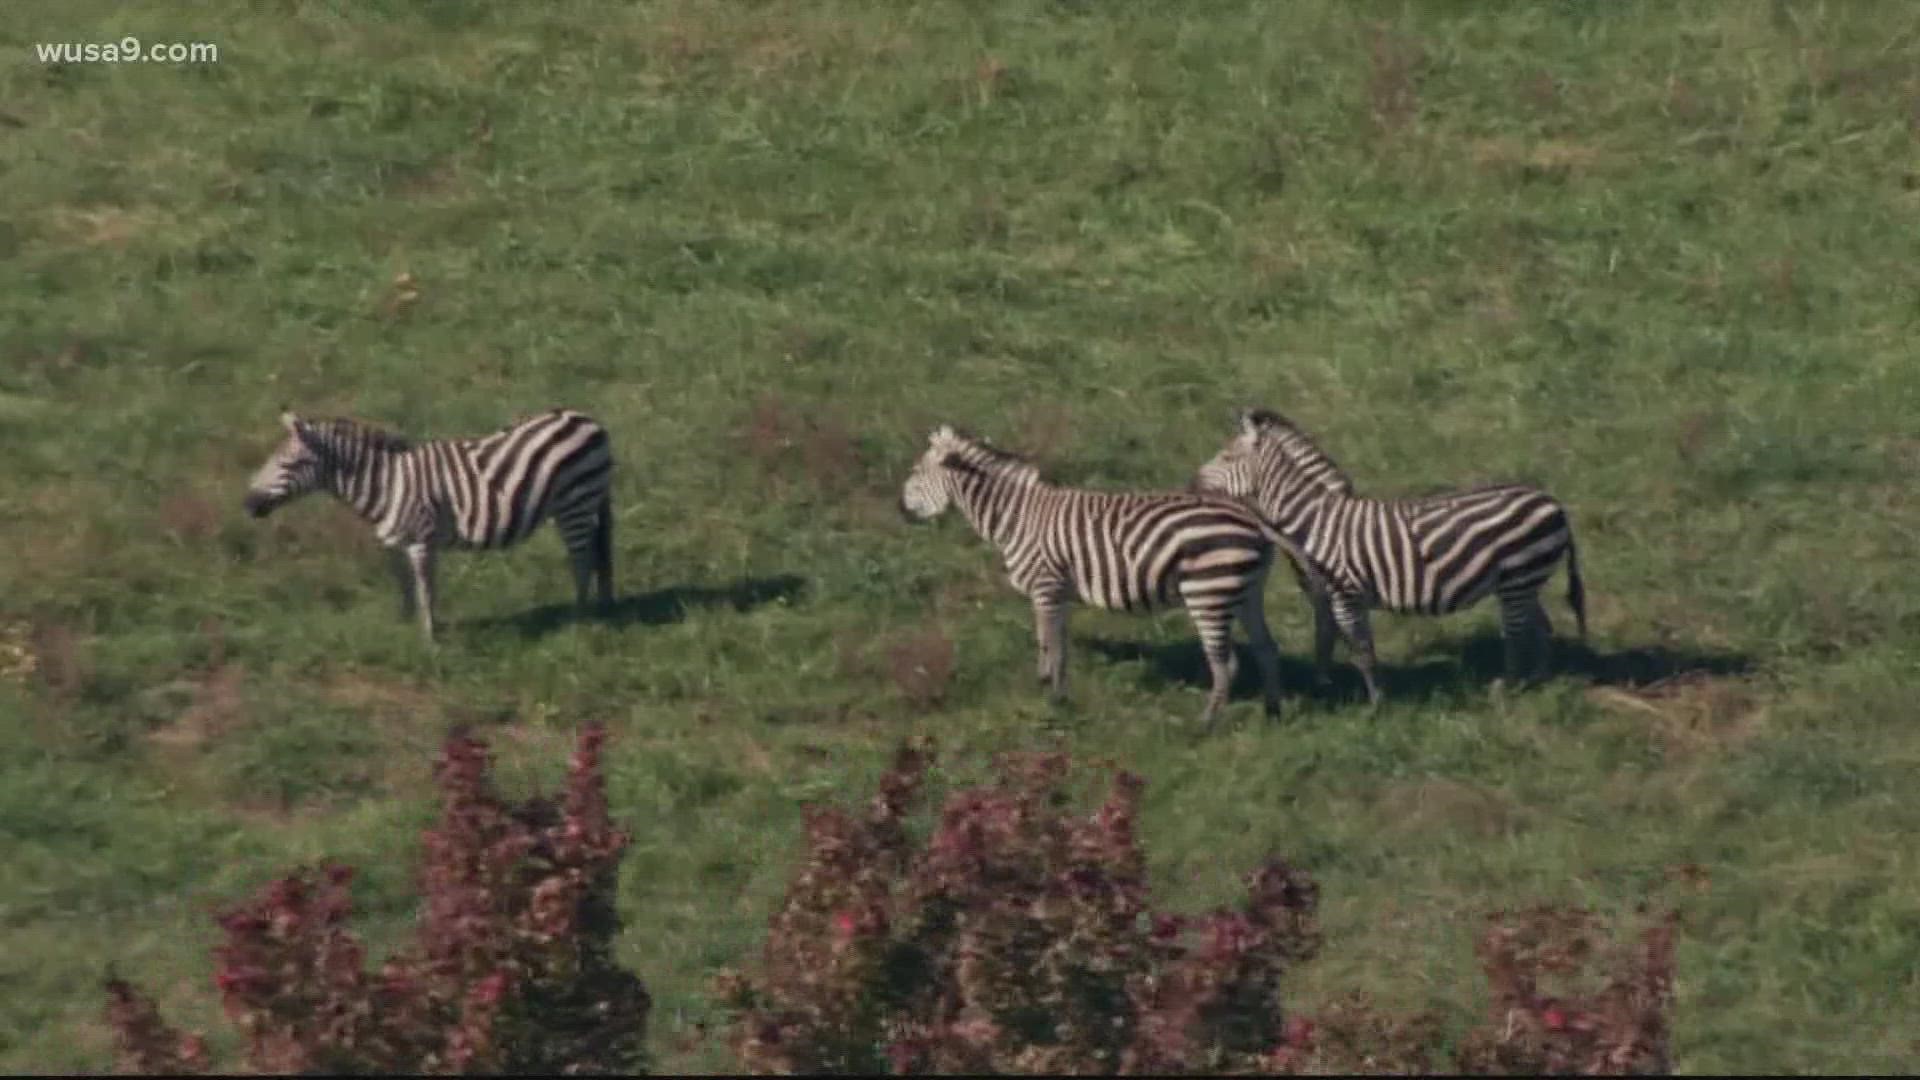 You can have a pet zebra in Maryland and Virginia but not in DC 